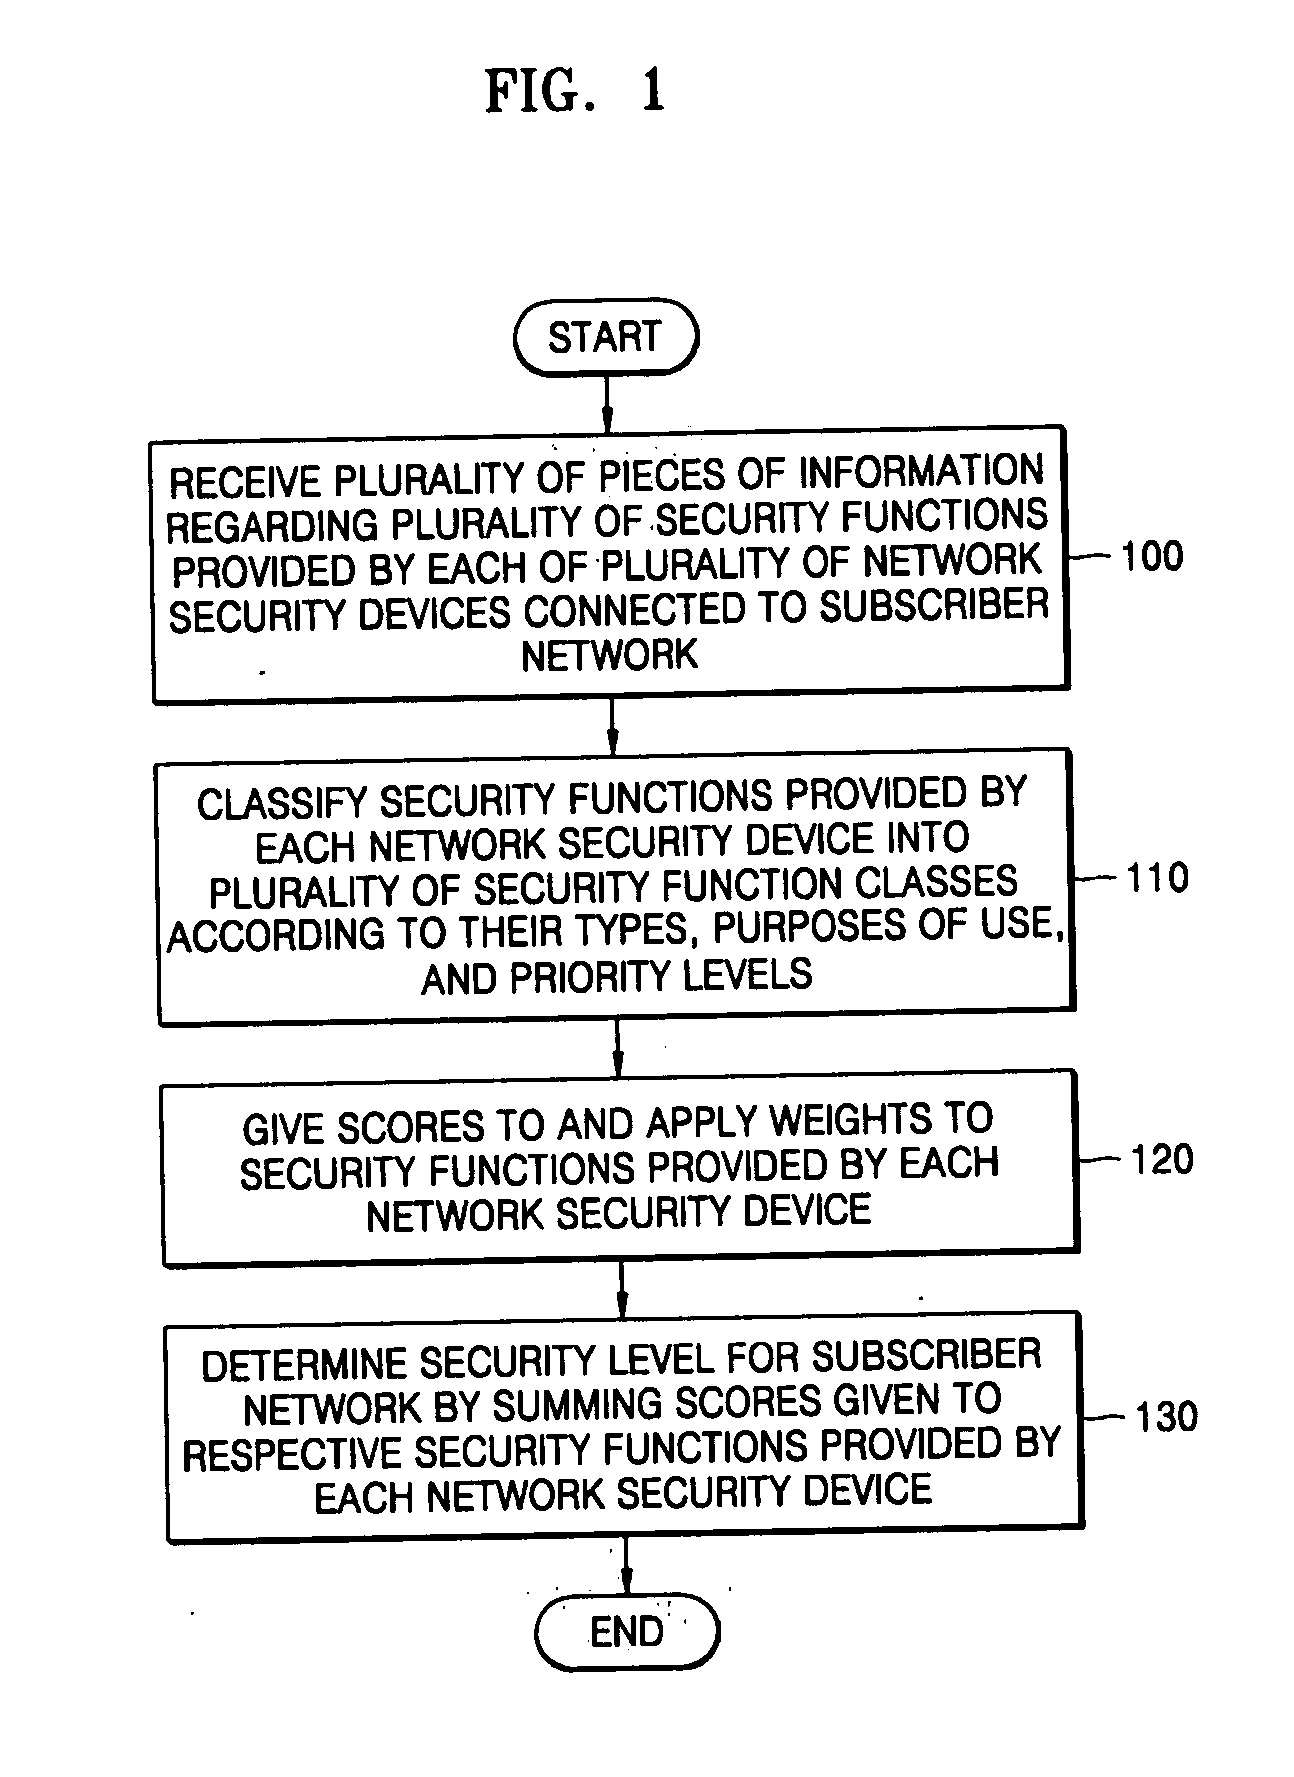 Method and apparatus for evaluating security of subscriber network